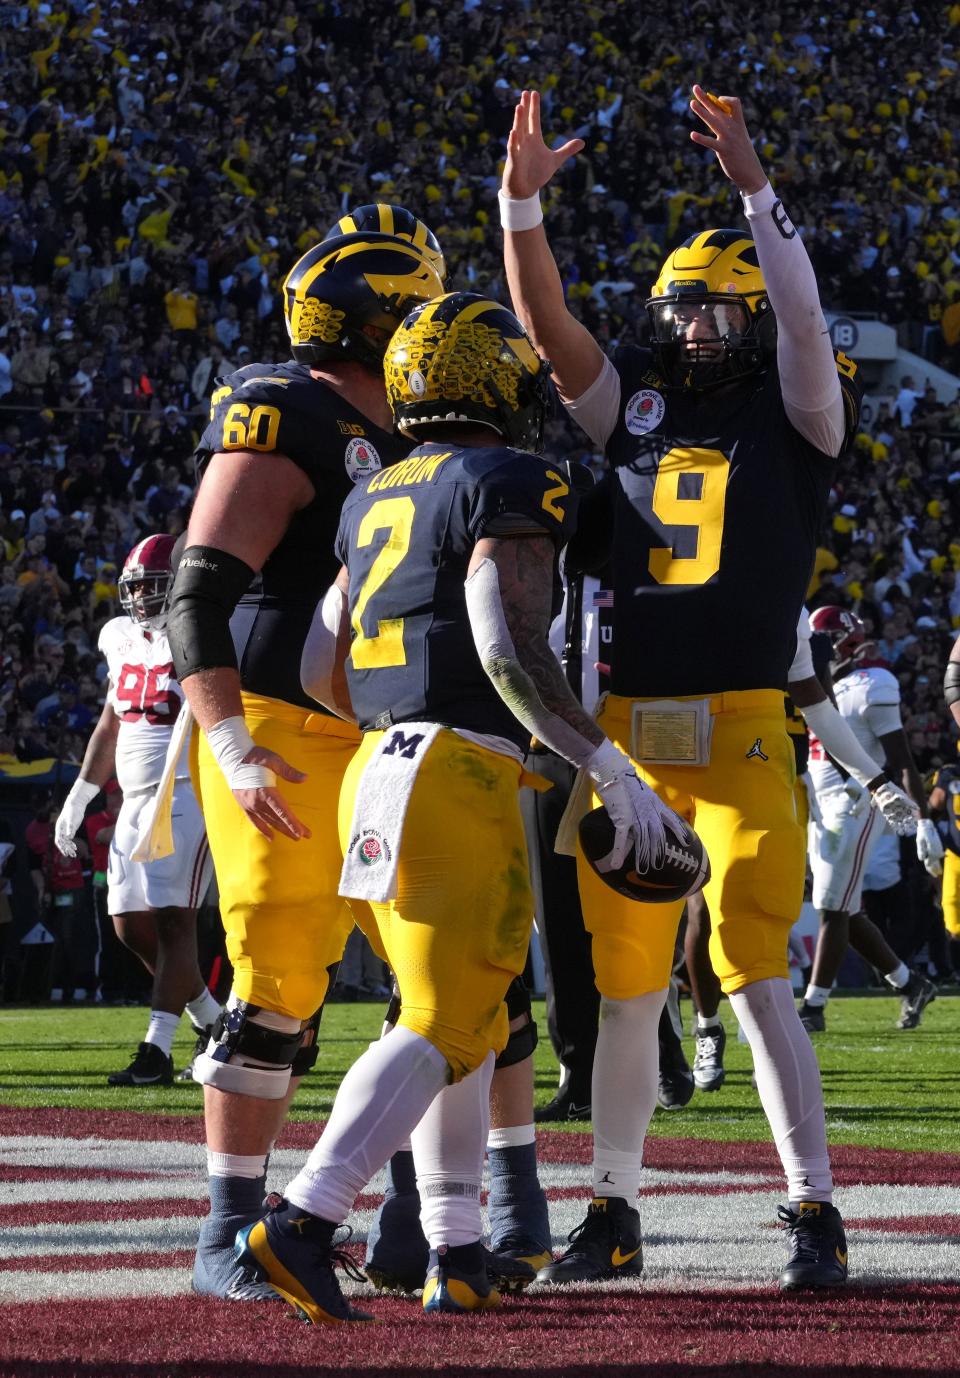 The Michigan Wolverines won the Rose Bowl for the first time since they defeated Washington State on Jan. 1, 1998 to cap a perfect season.